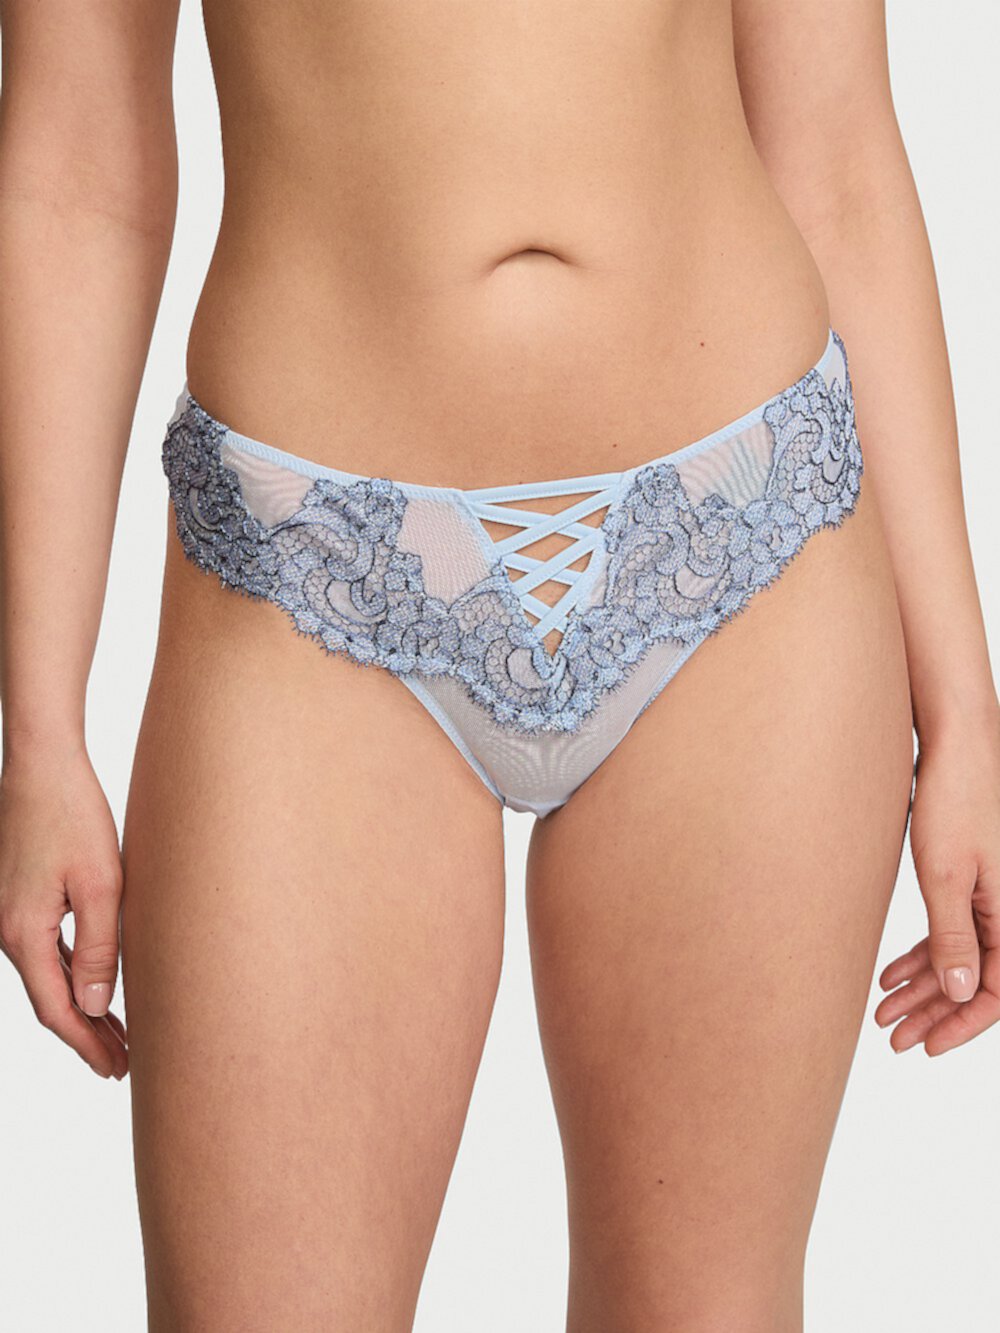 Boho Floral Embroidery Brazilian Panty Dream Angels